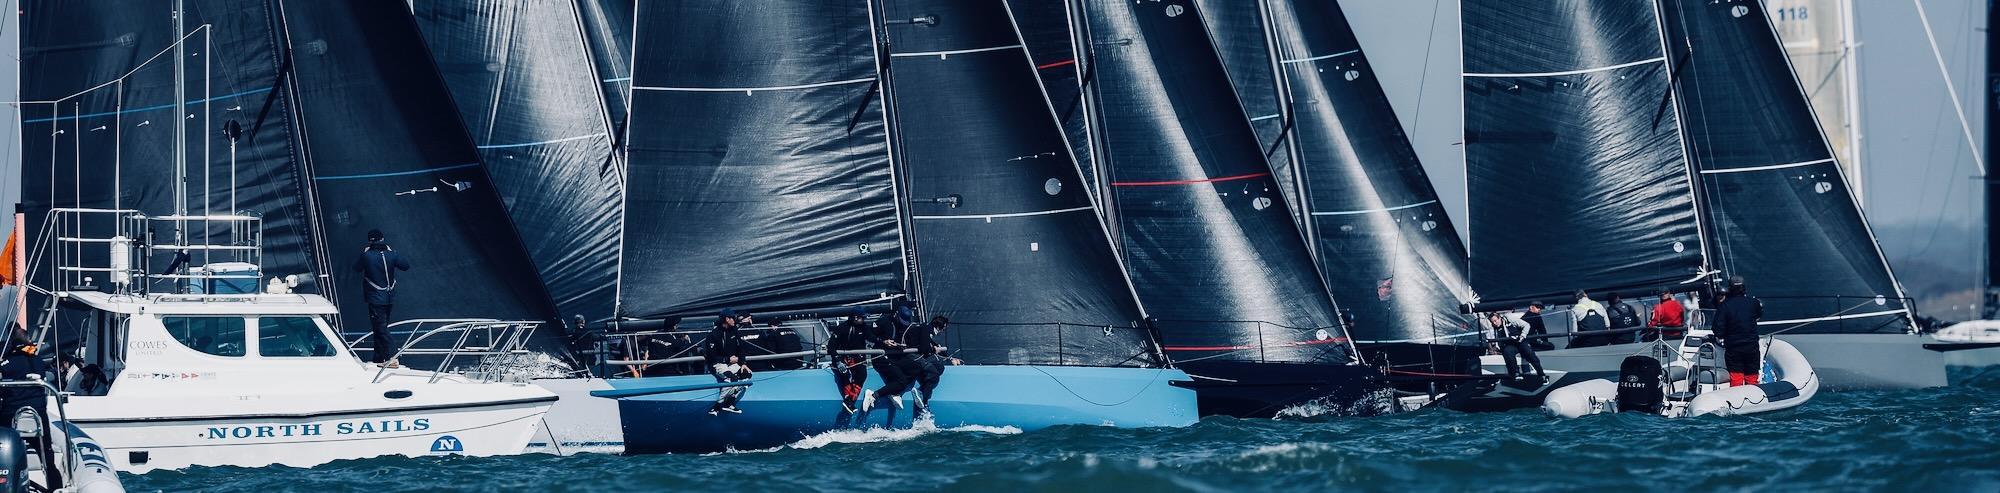 The RORC Easter Challenge is designed to kick-start any teams racing season. Held over the Easter Weekend for over 20 years, the Royal Ocean Racing Club training regatta offers a fantastic opportunity for world class coaching which is complimentary for all entrants. © Paul Wyeth/RORC